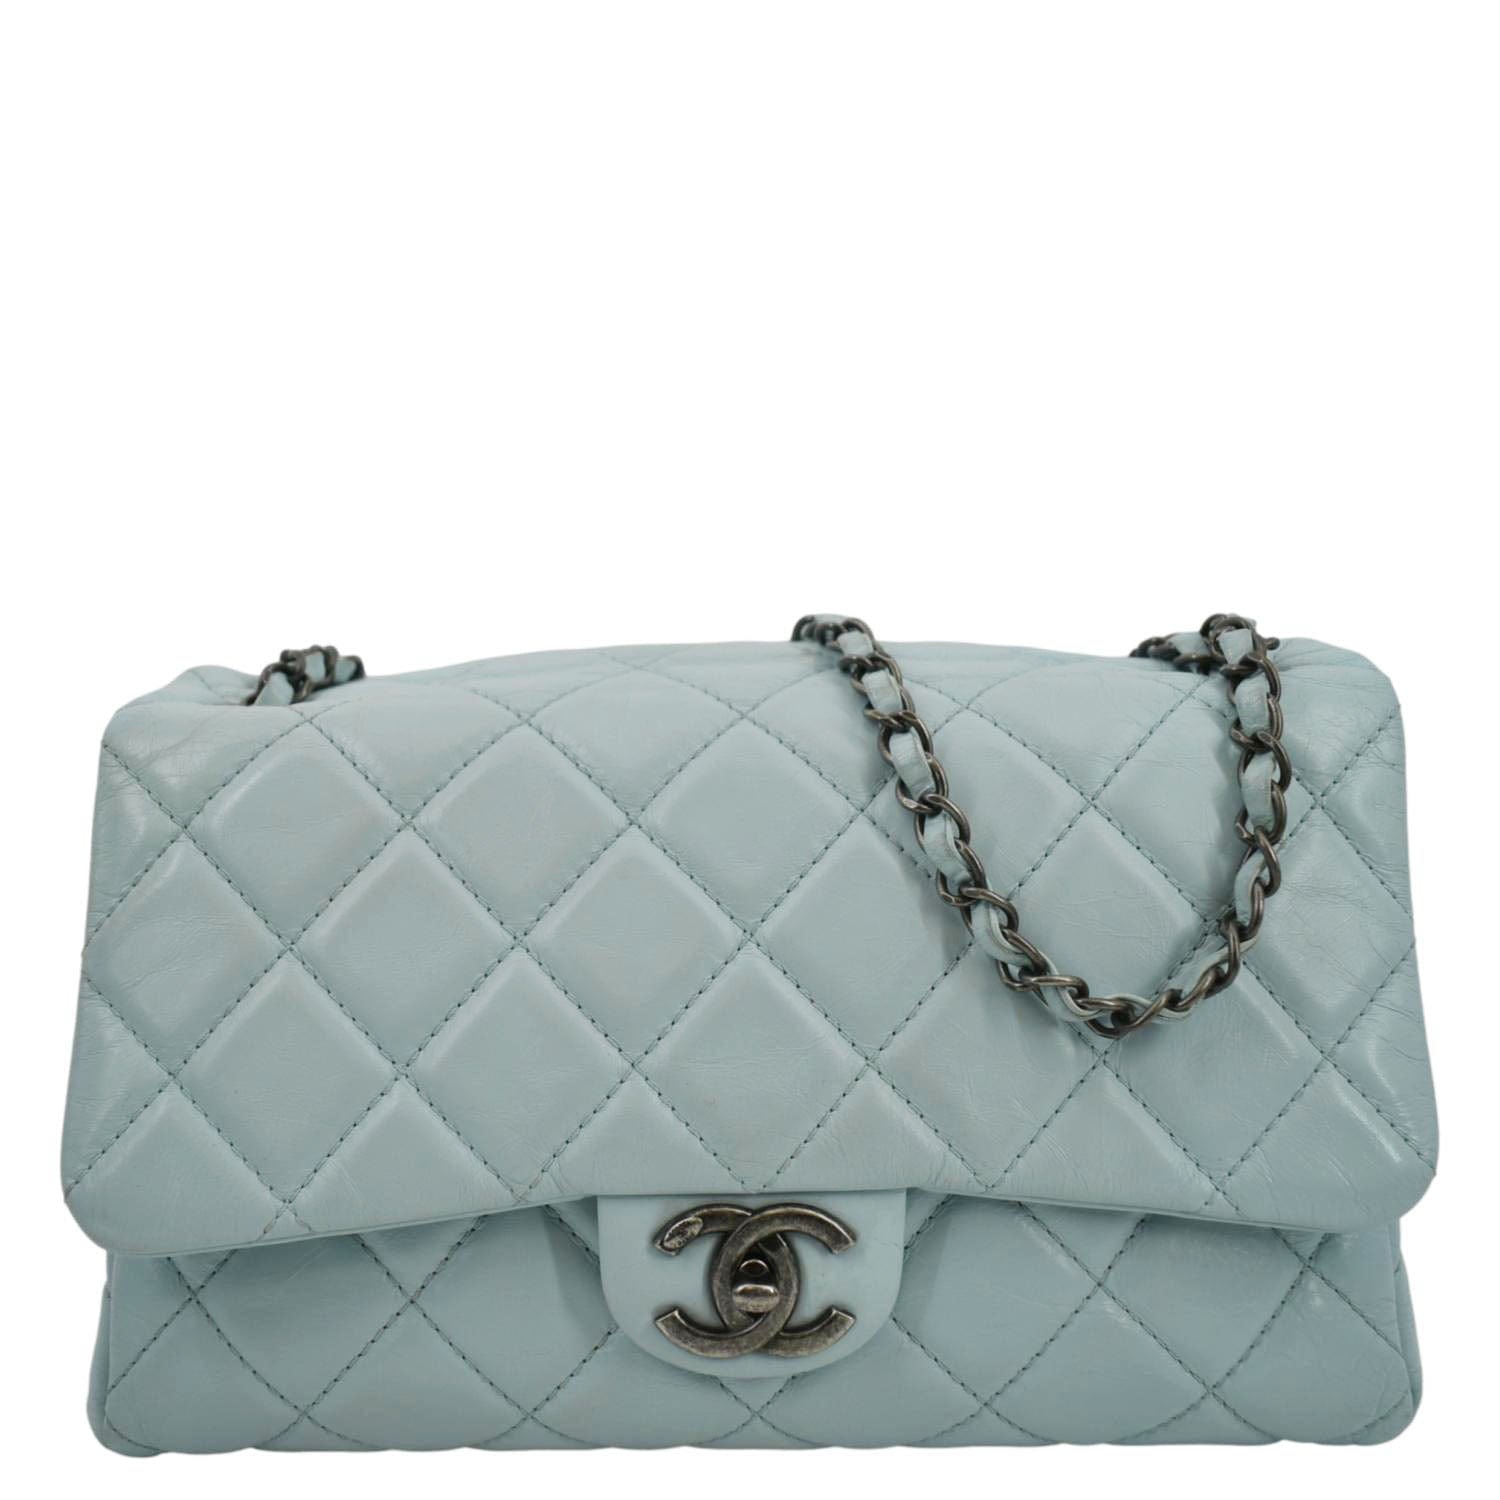 CHANEL Blue Quilted Leather Maxi Timeless Classic 2.55 Single Flap Bag